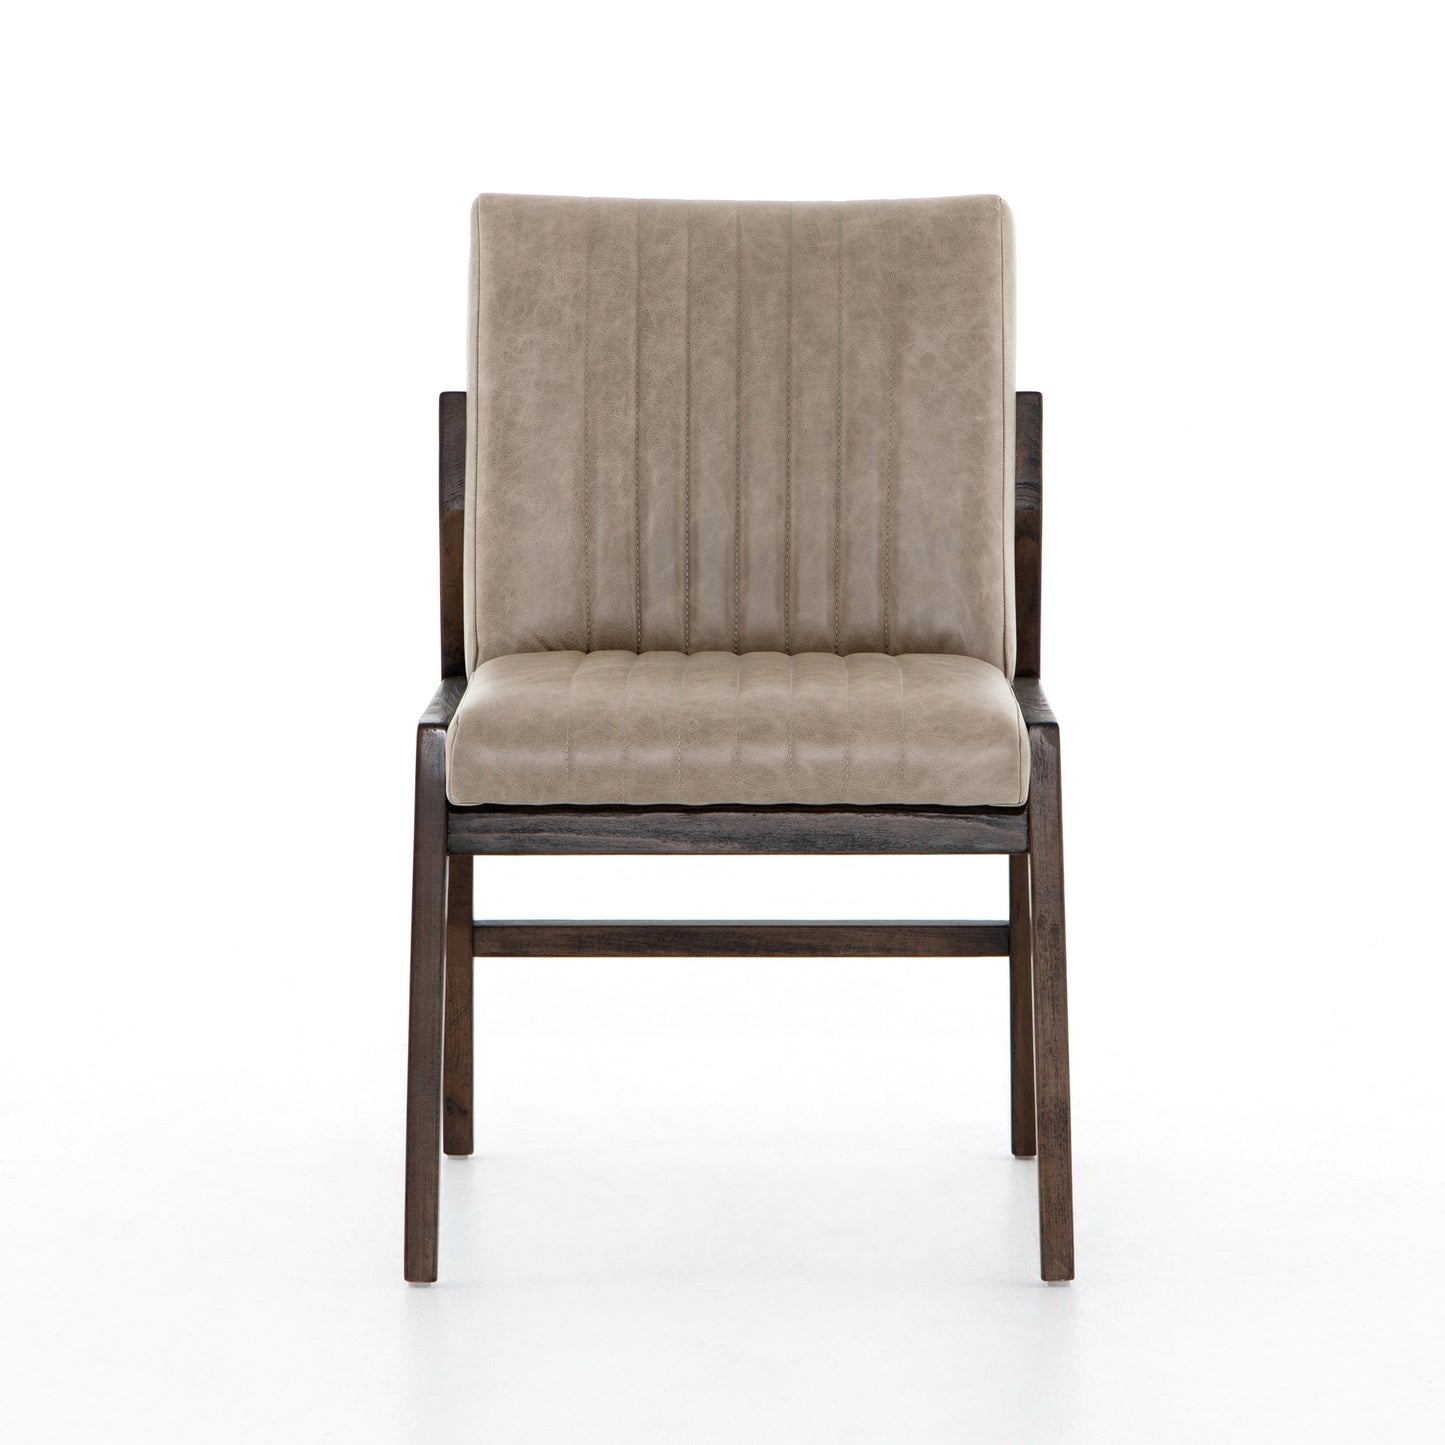 Oakley Dining Chair